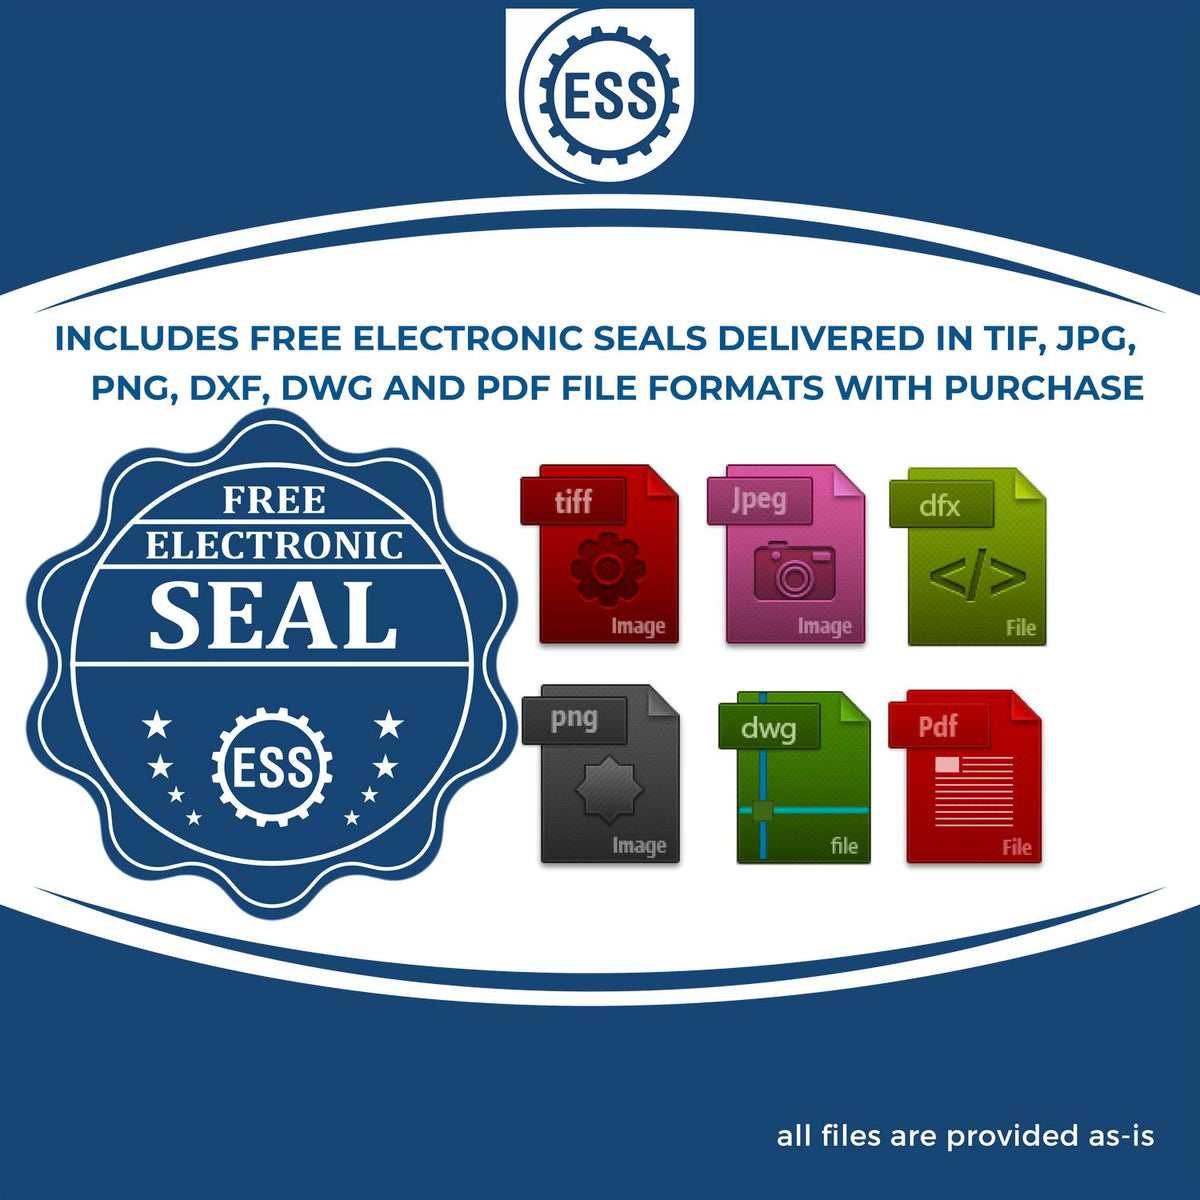 An infographic for the free electronic seal for the Slim Pre-Inked Wyoming Land Surveyor Seal Stamp illustrating the different file type icons such as DXF, DWG, TIF, JPG and PNG.